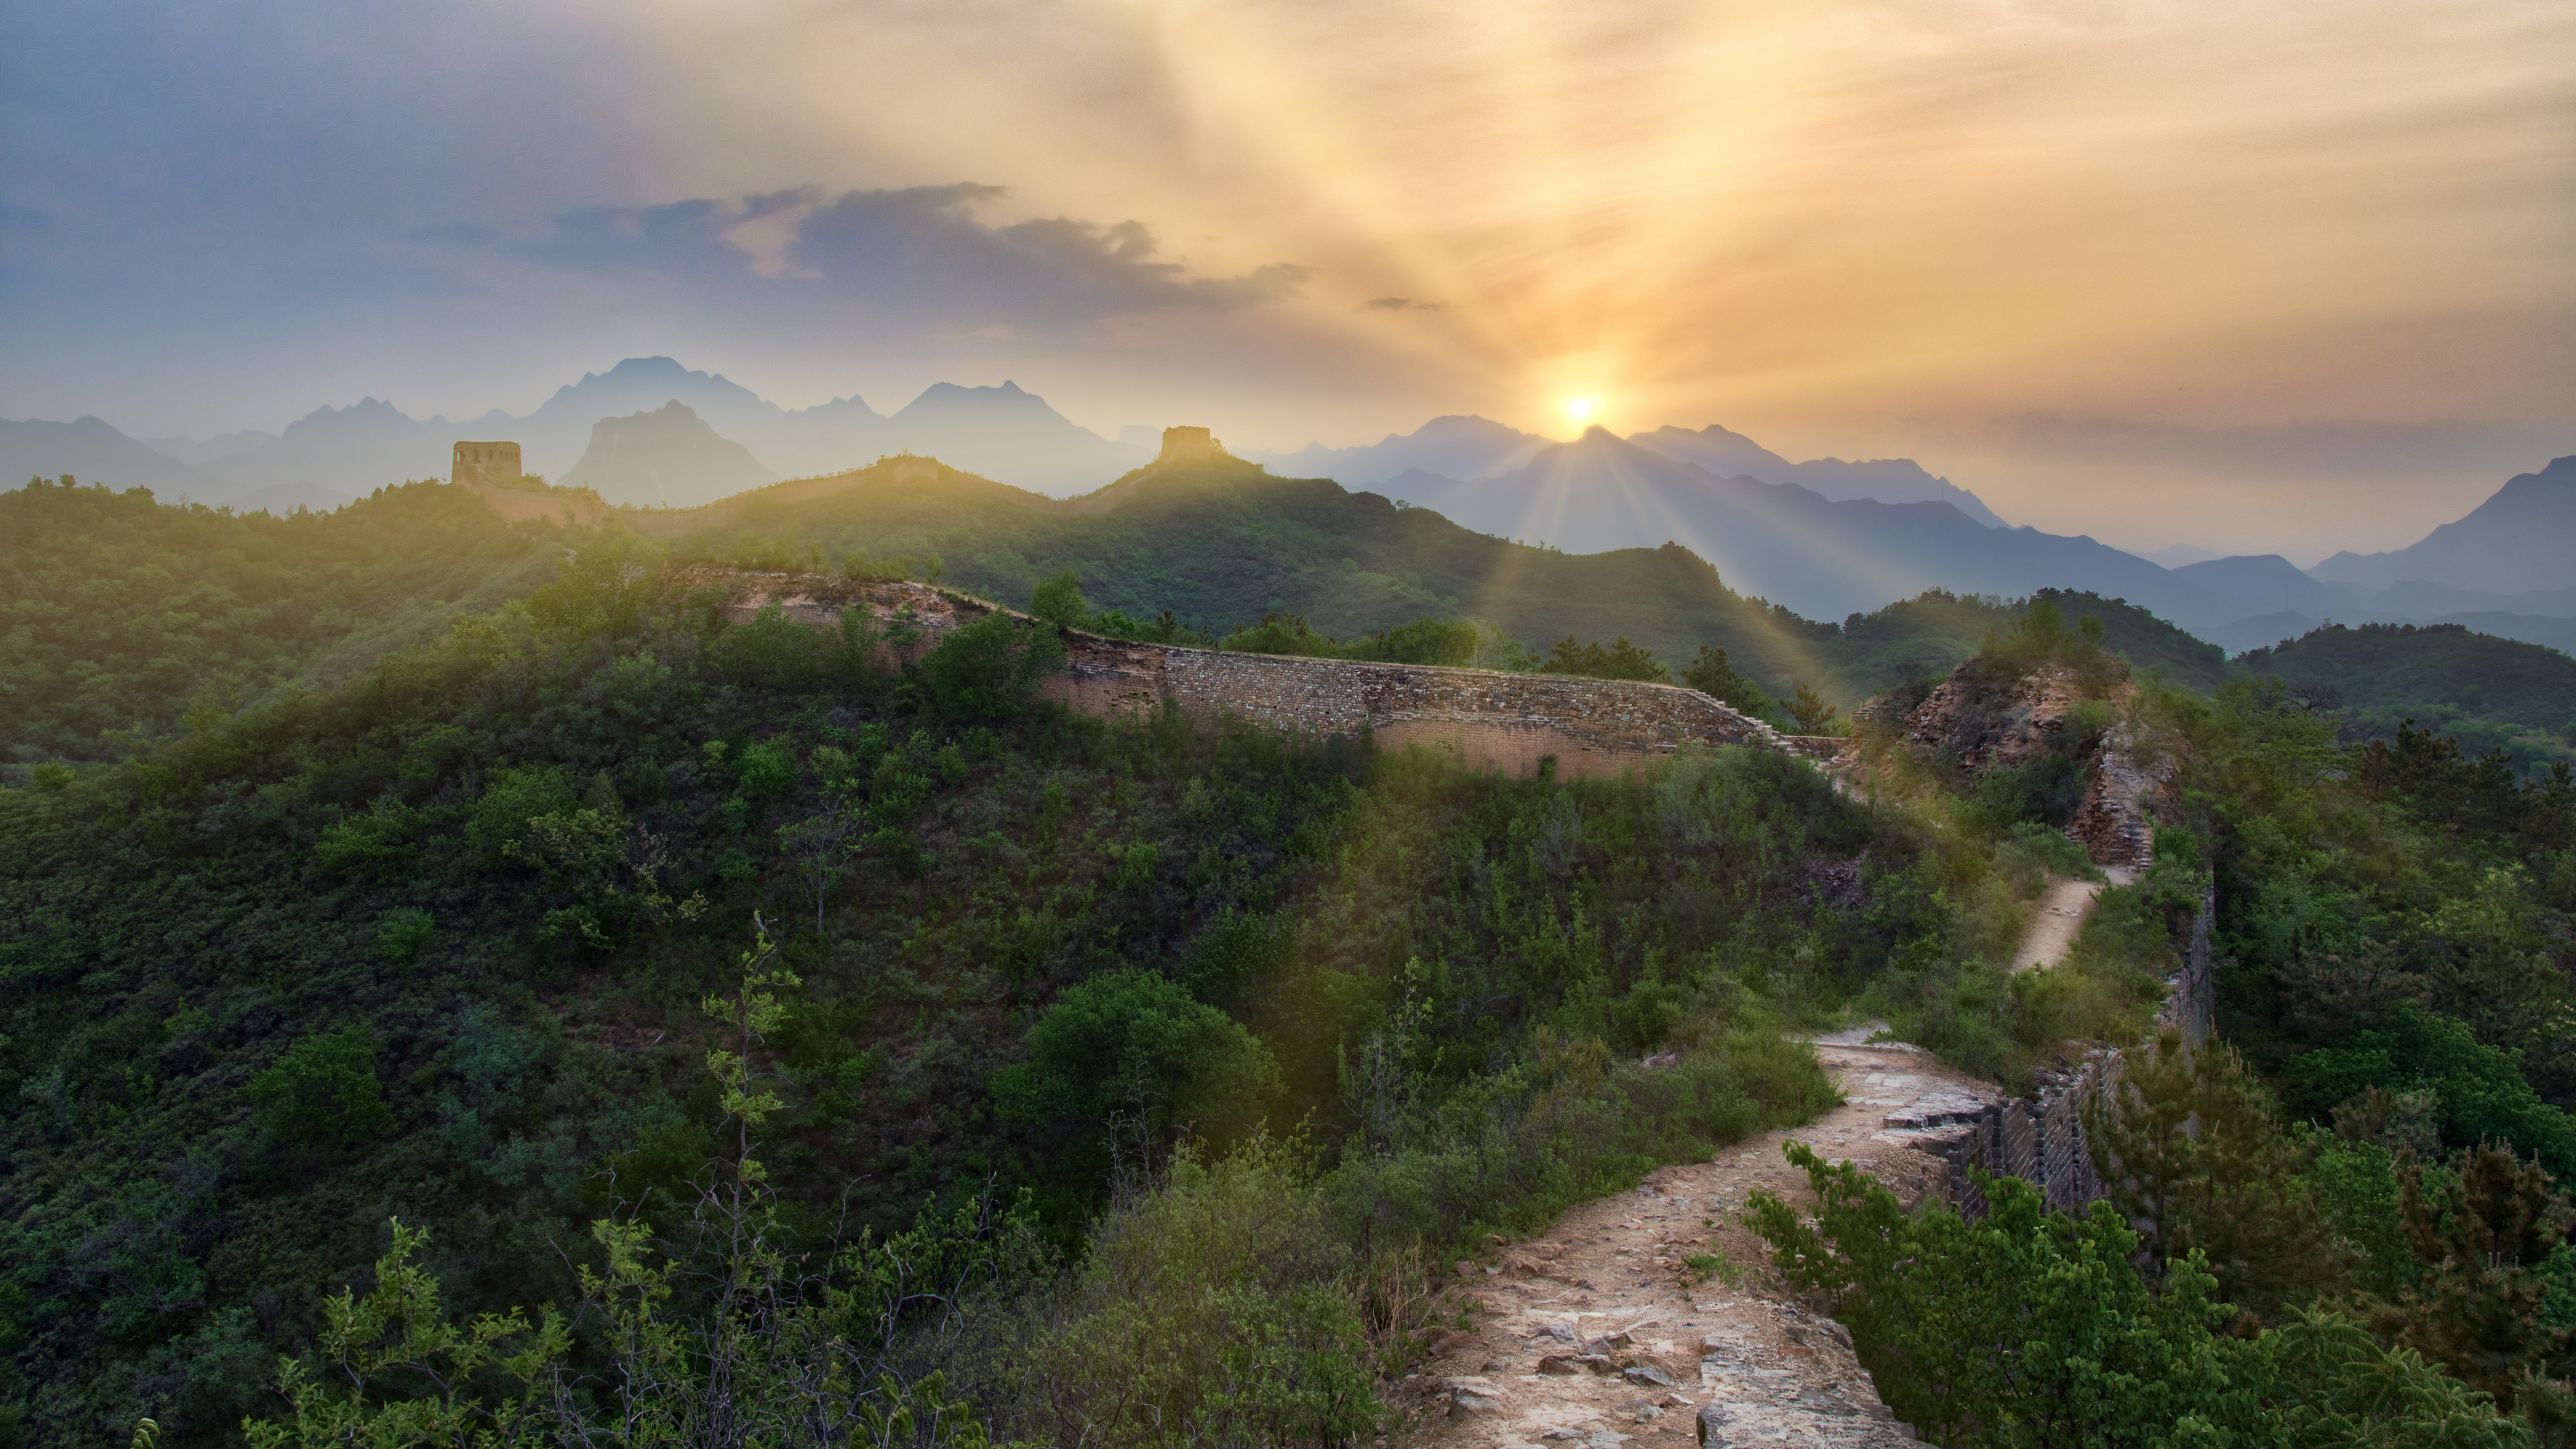 General 3840x2160 landscape mountains hills forest Sun nature Great Wall of China sun rays sky 4K China